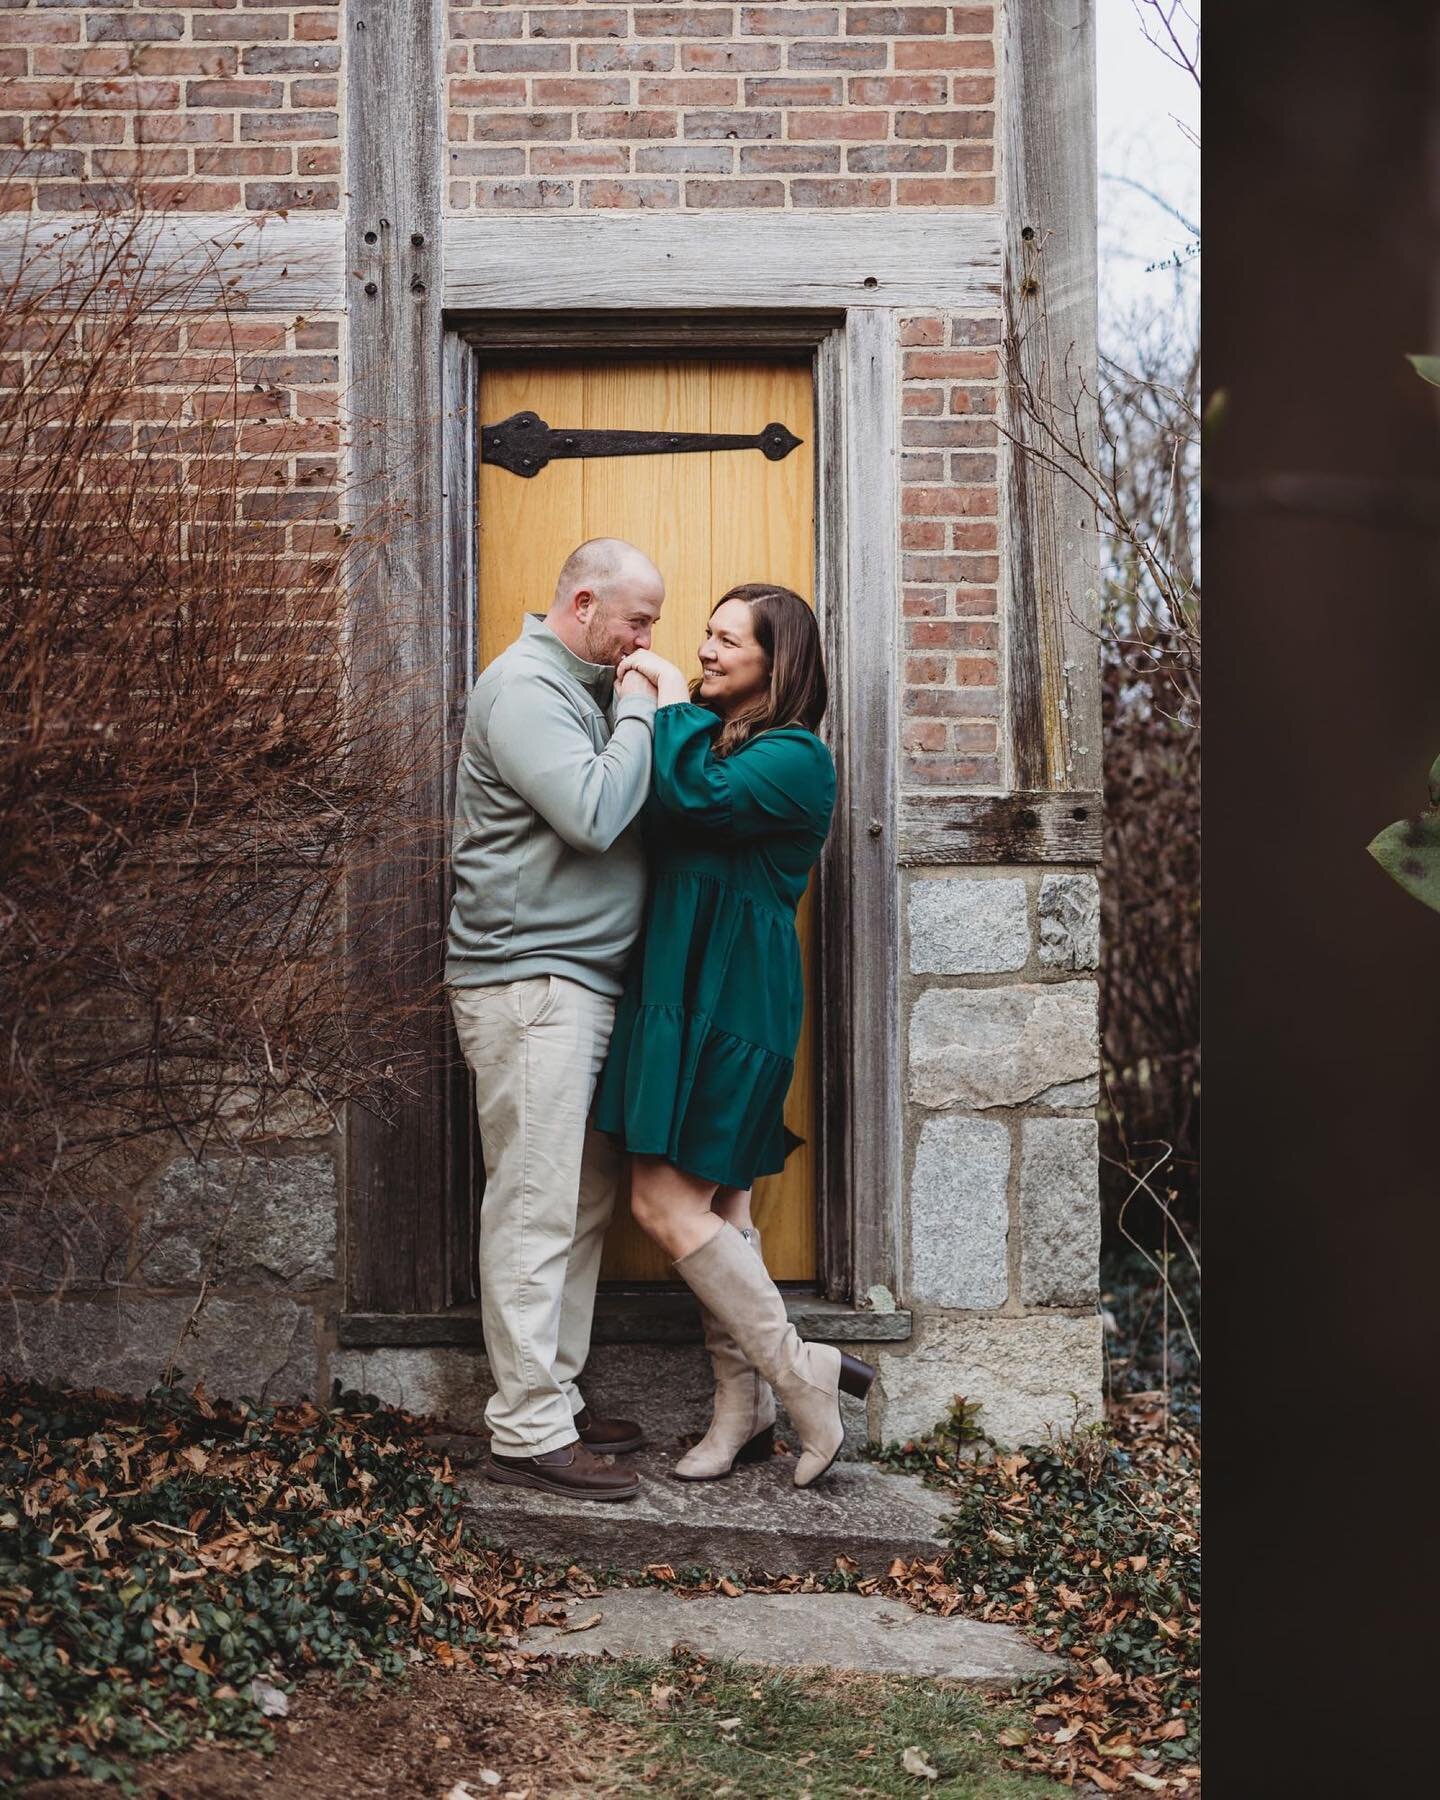 The coldest engagement session with the most laughs! So so excited for Courtney and Ross&rsquo; @candlelightfarmsinn wedding this coming fall. ✨ From the minute we had our phone call, we knew Courtney and Ross were going to be a blast to be around. E